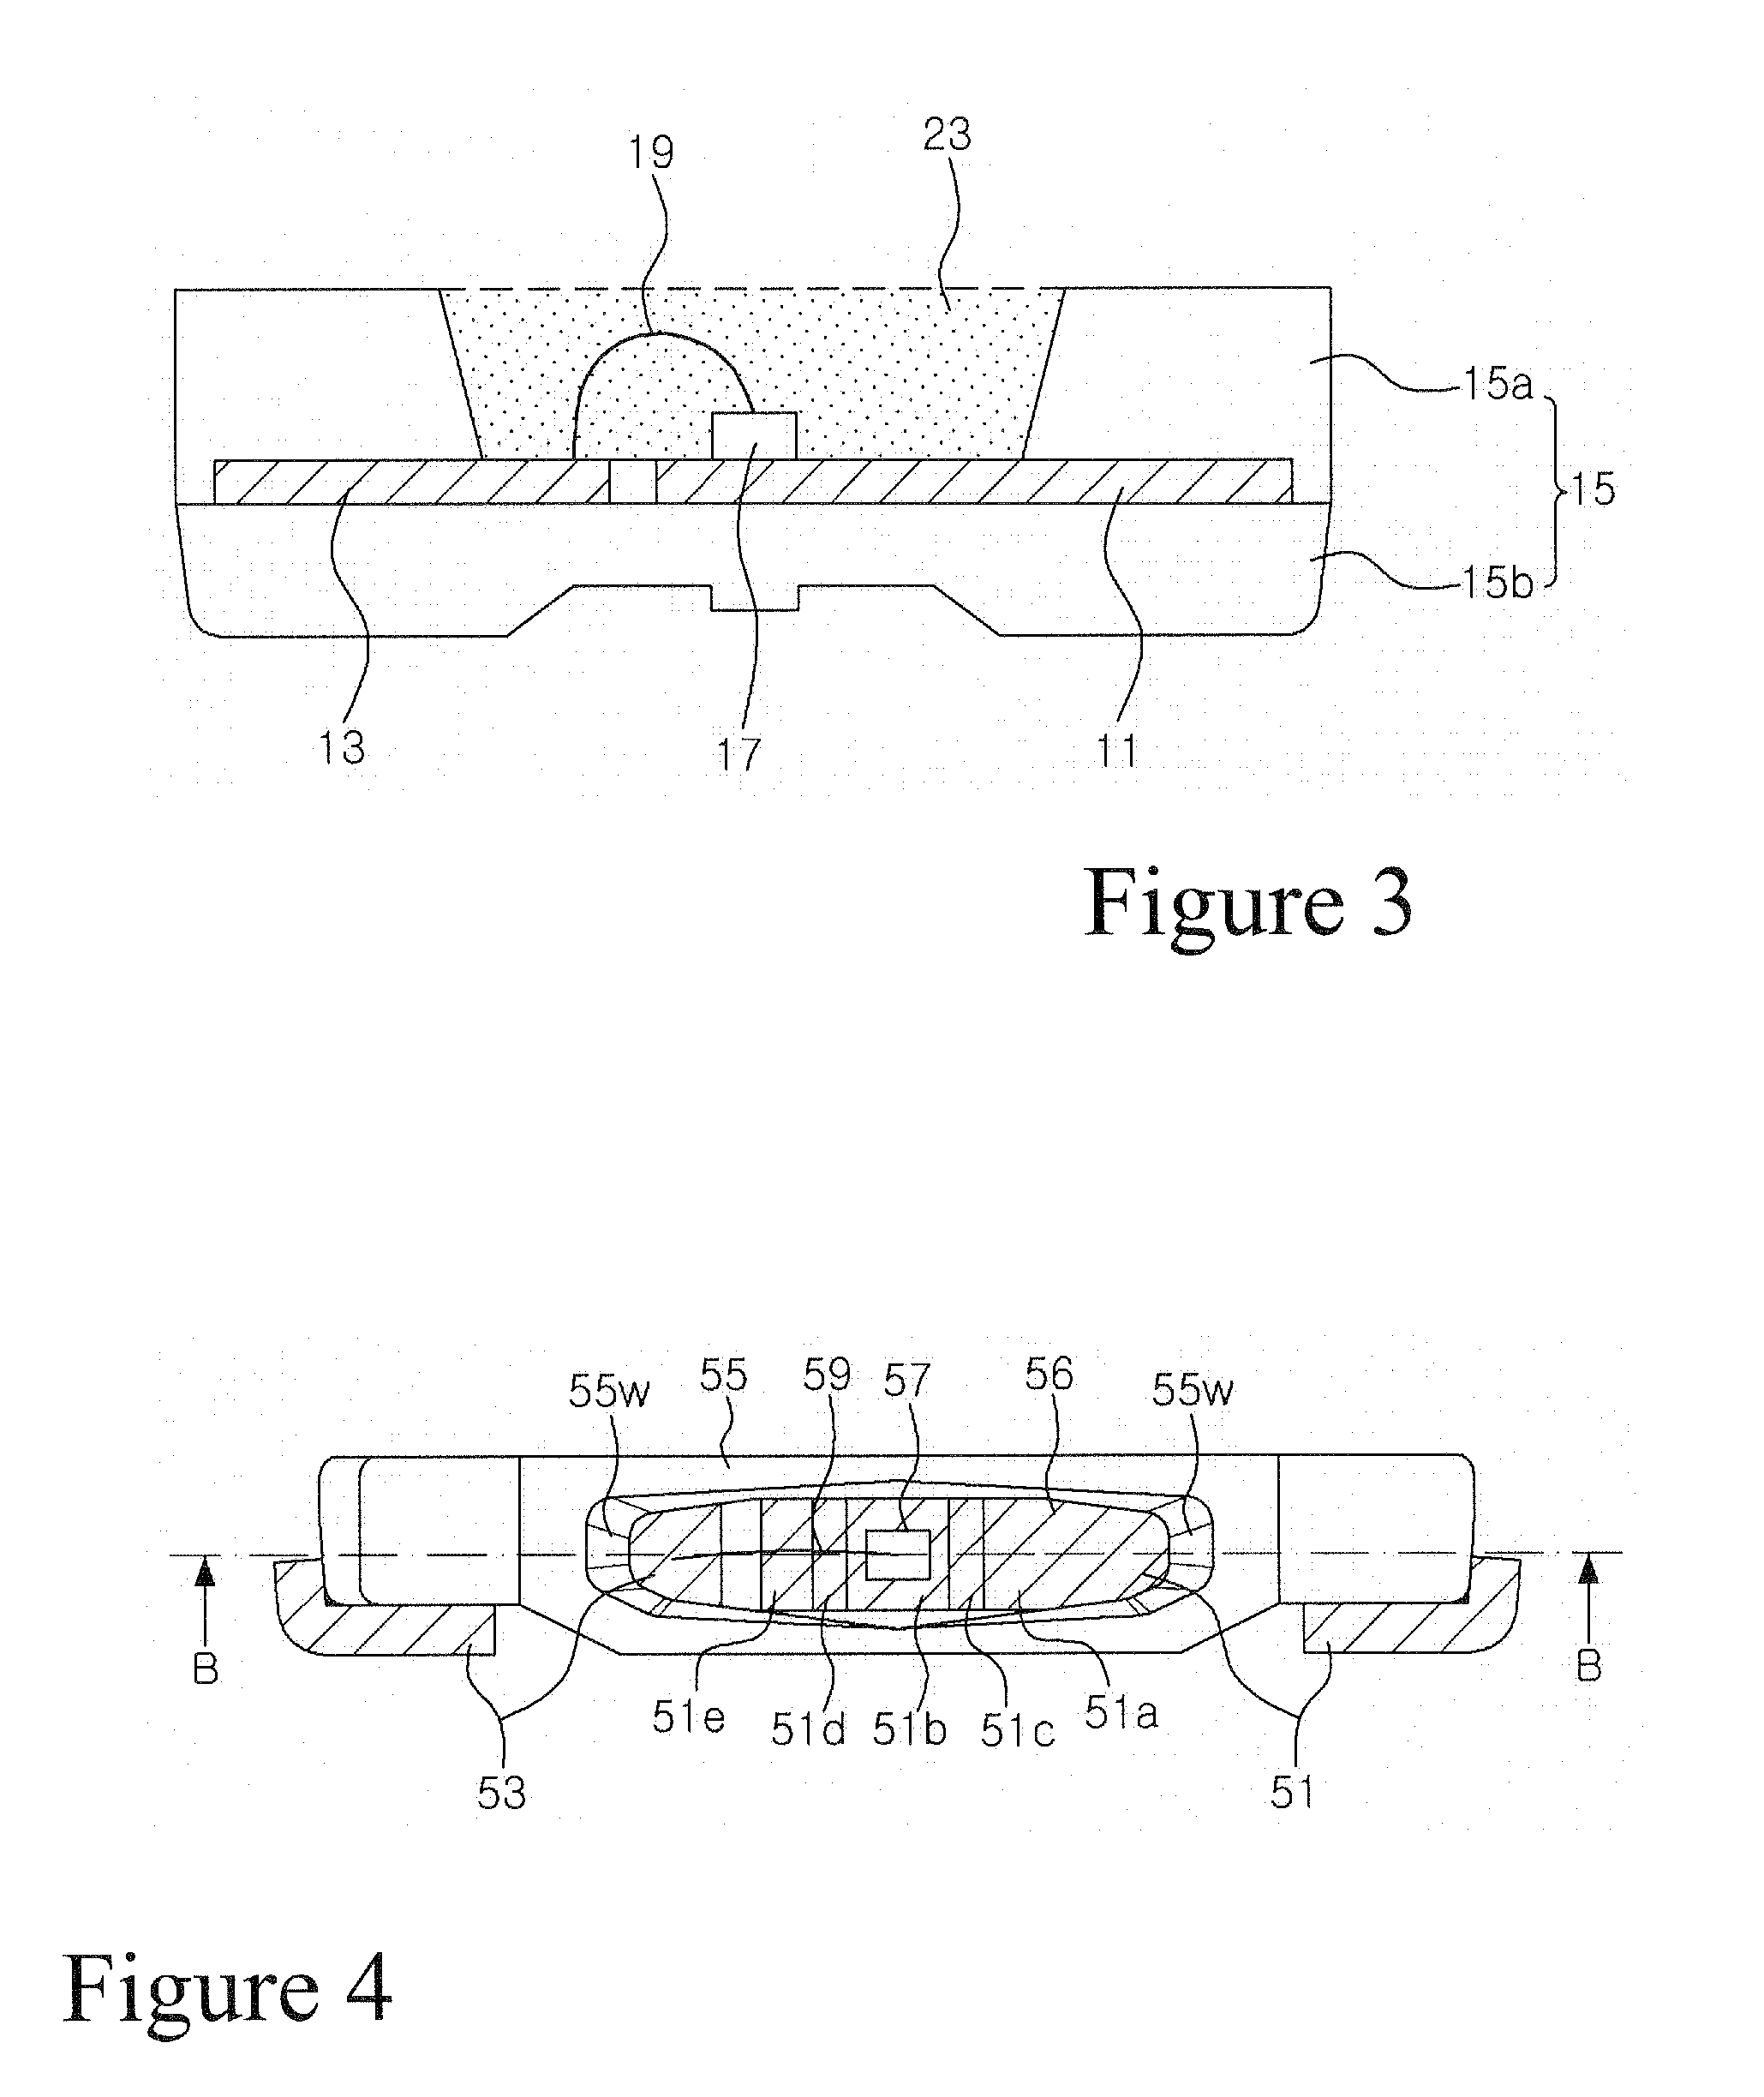 Light emitting diode package employing lead terminal with reflecting surface